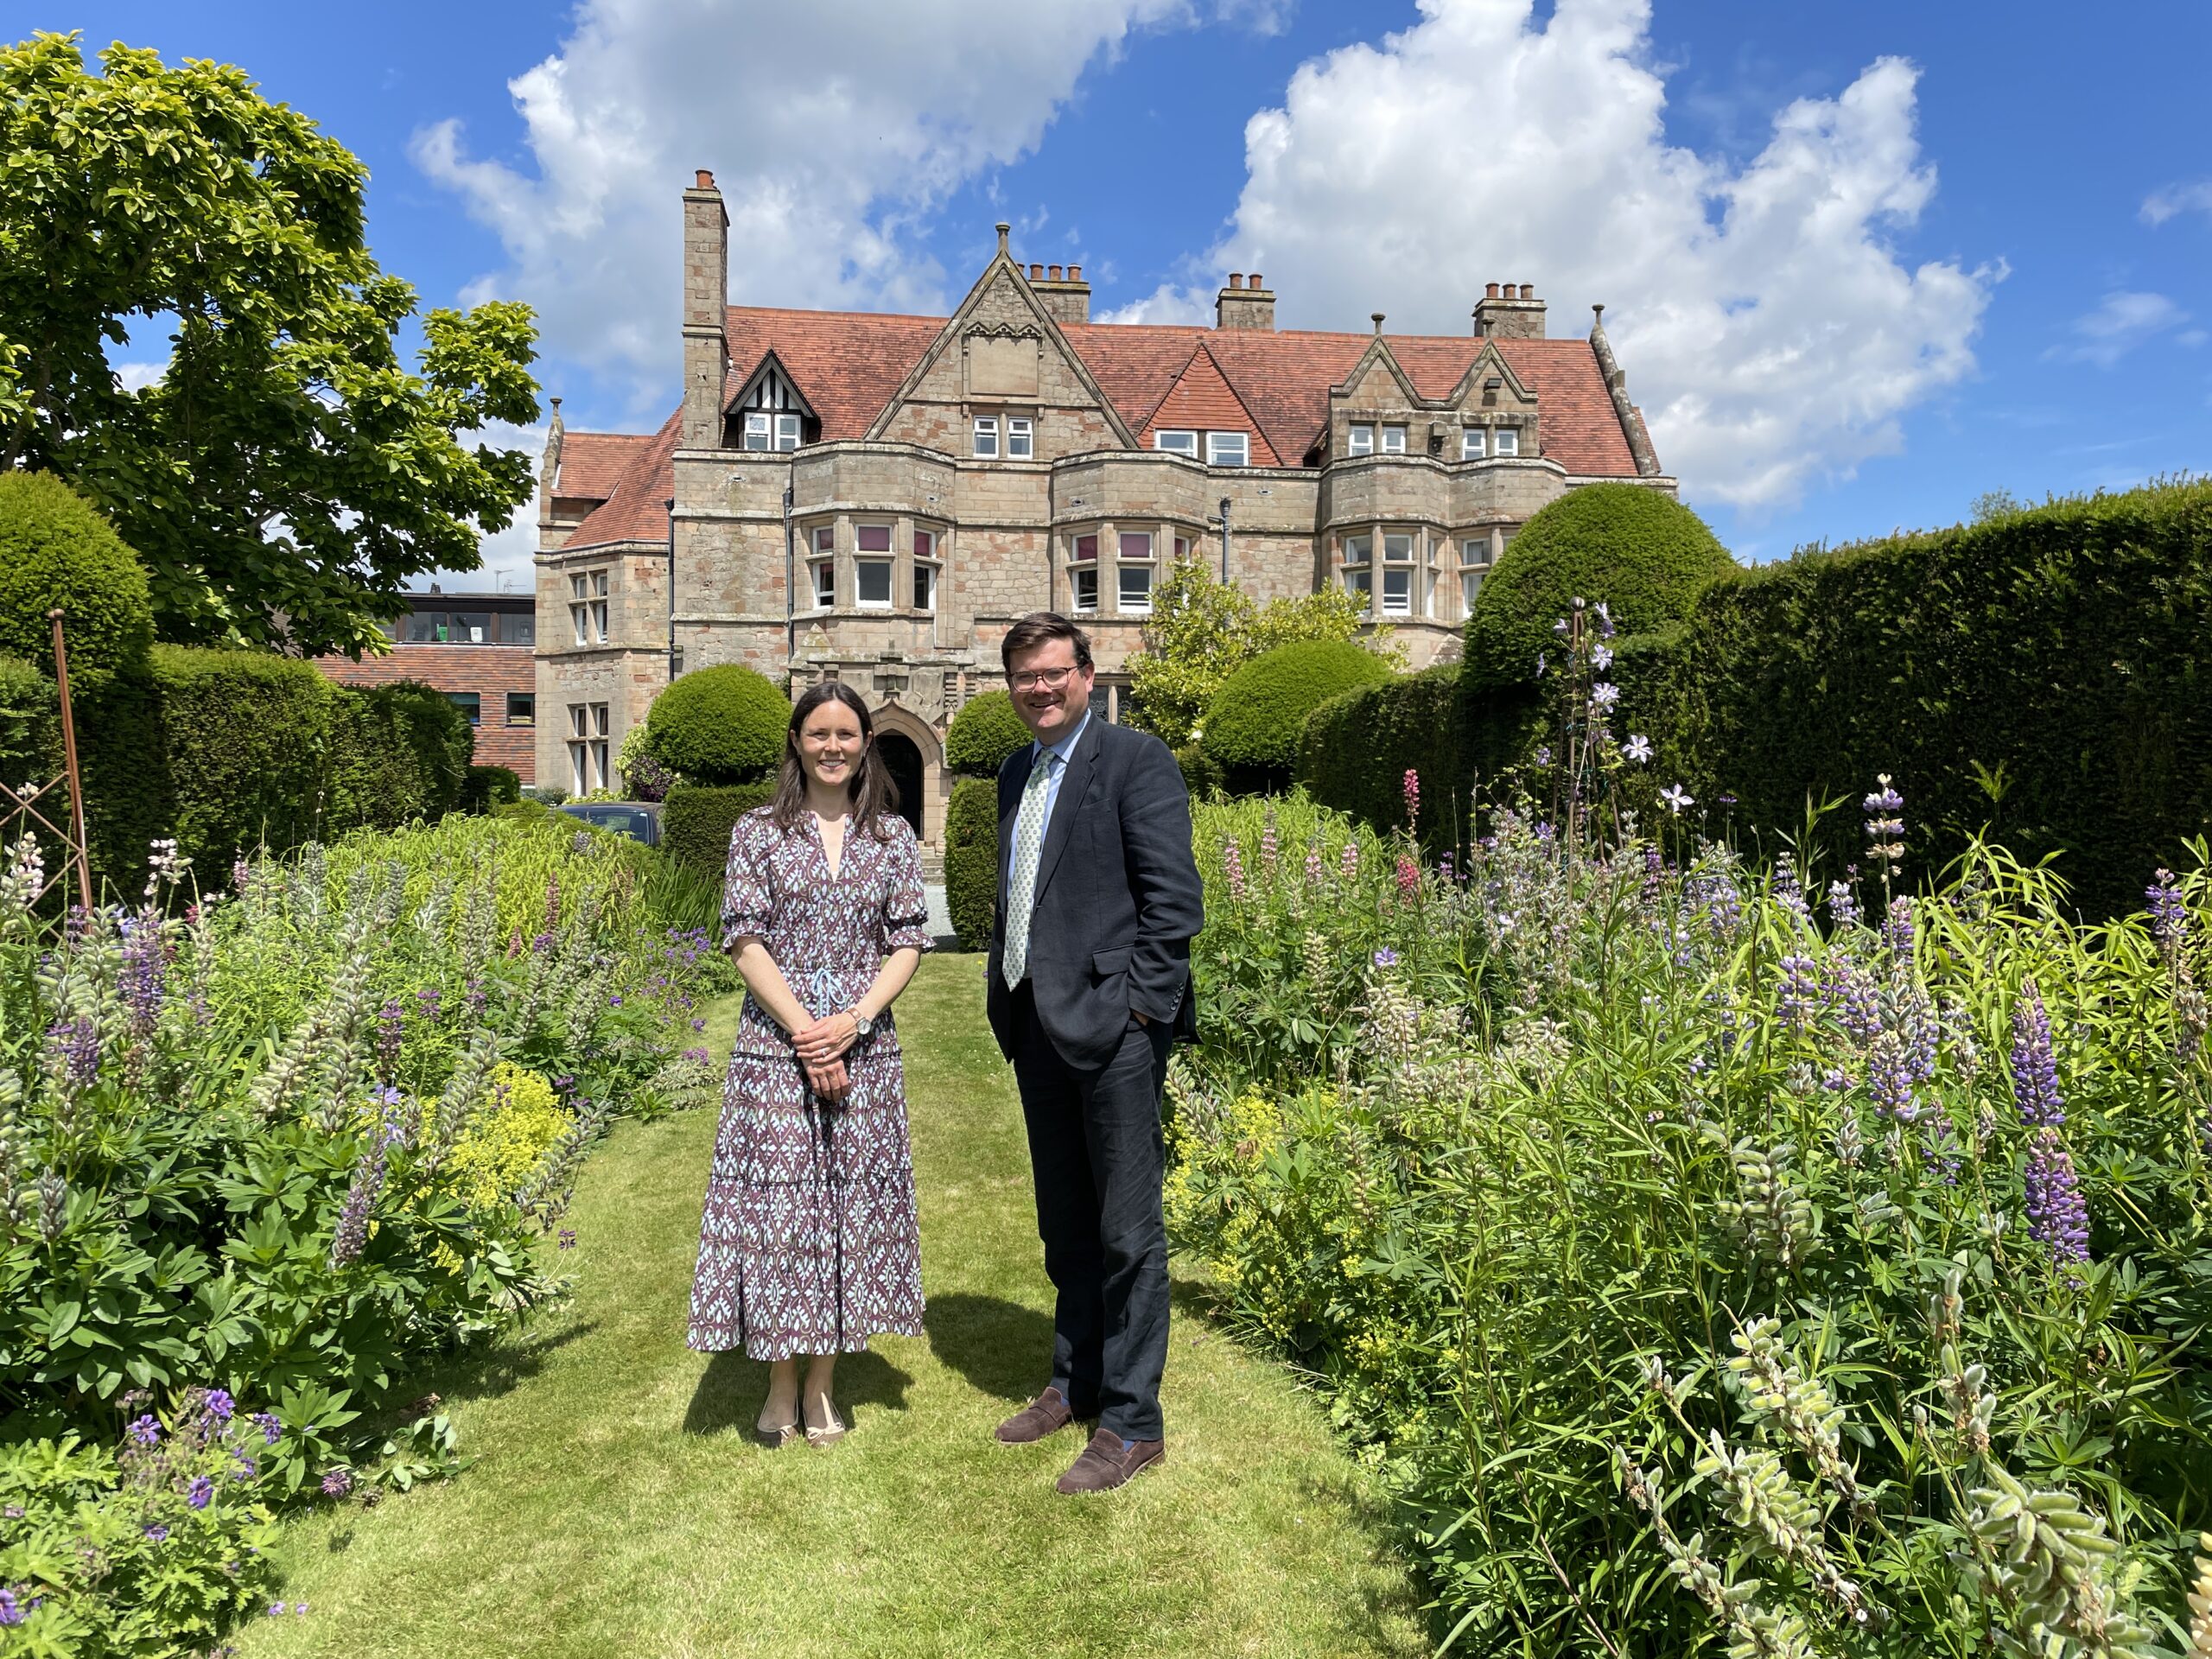 Packwood Head and Head of Admissions stood on beautiful lawn outside school